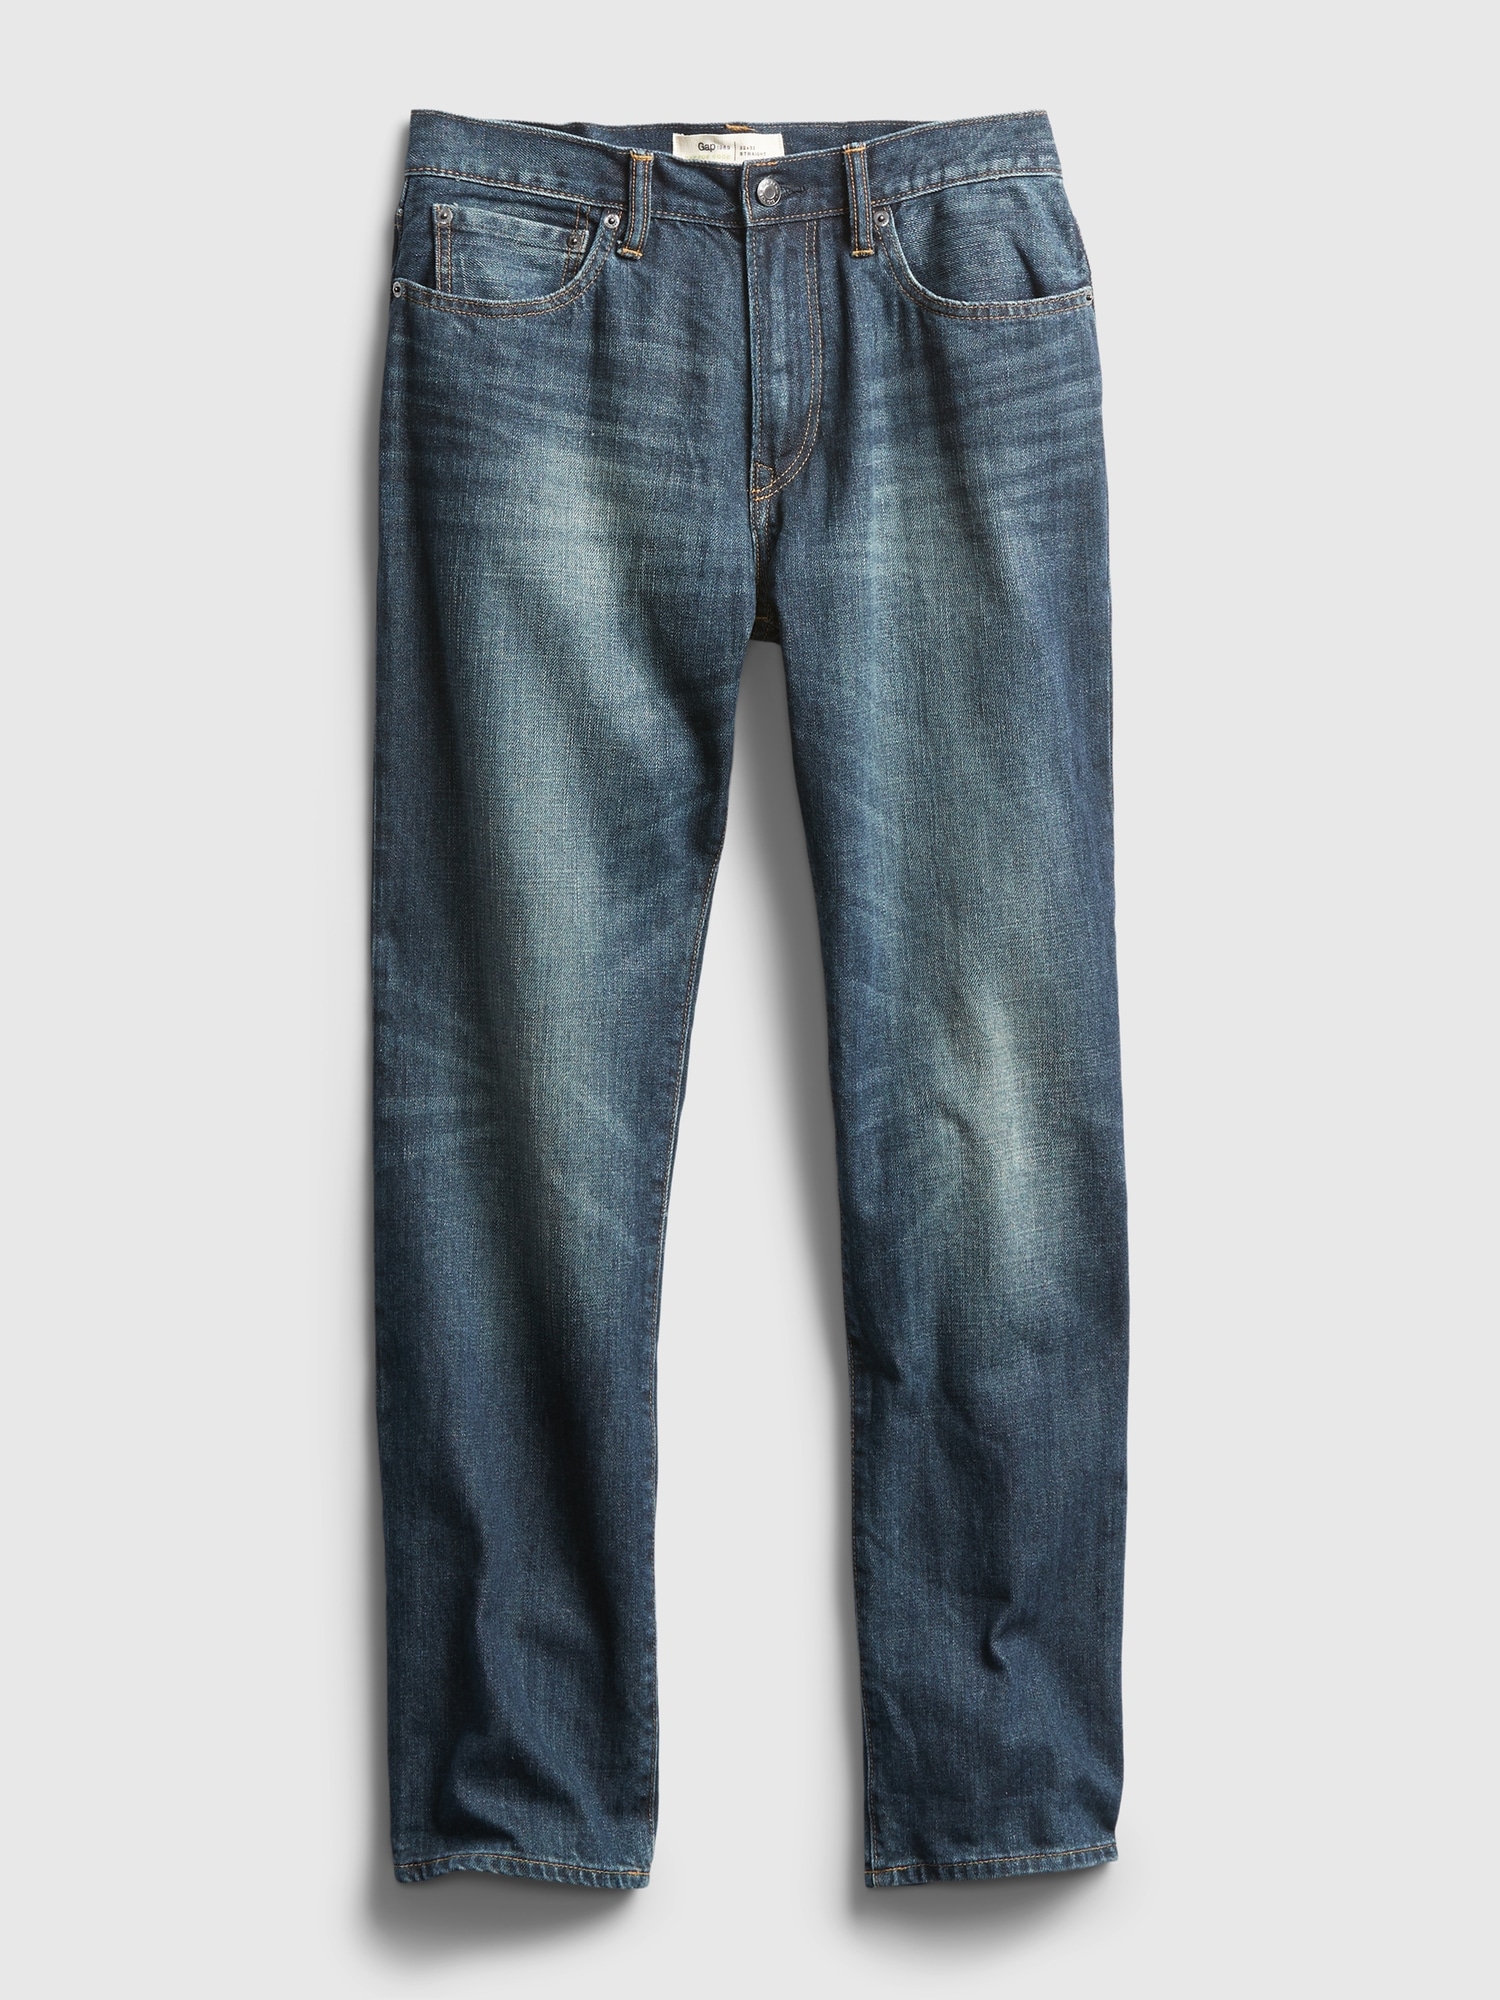 GAP Jeans Online Shop, Denim Jeans for All Occasions